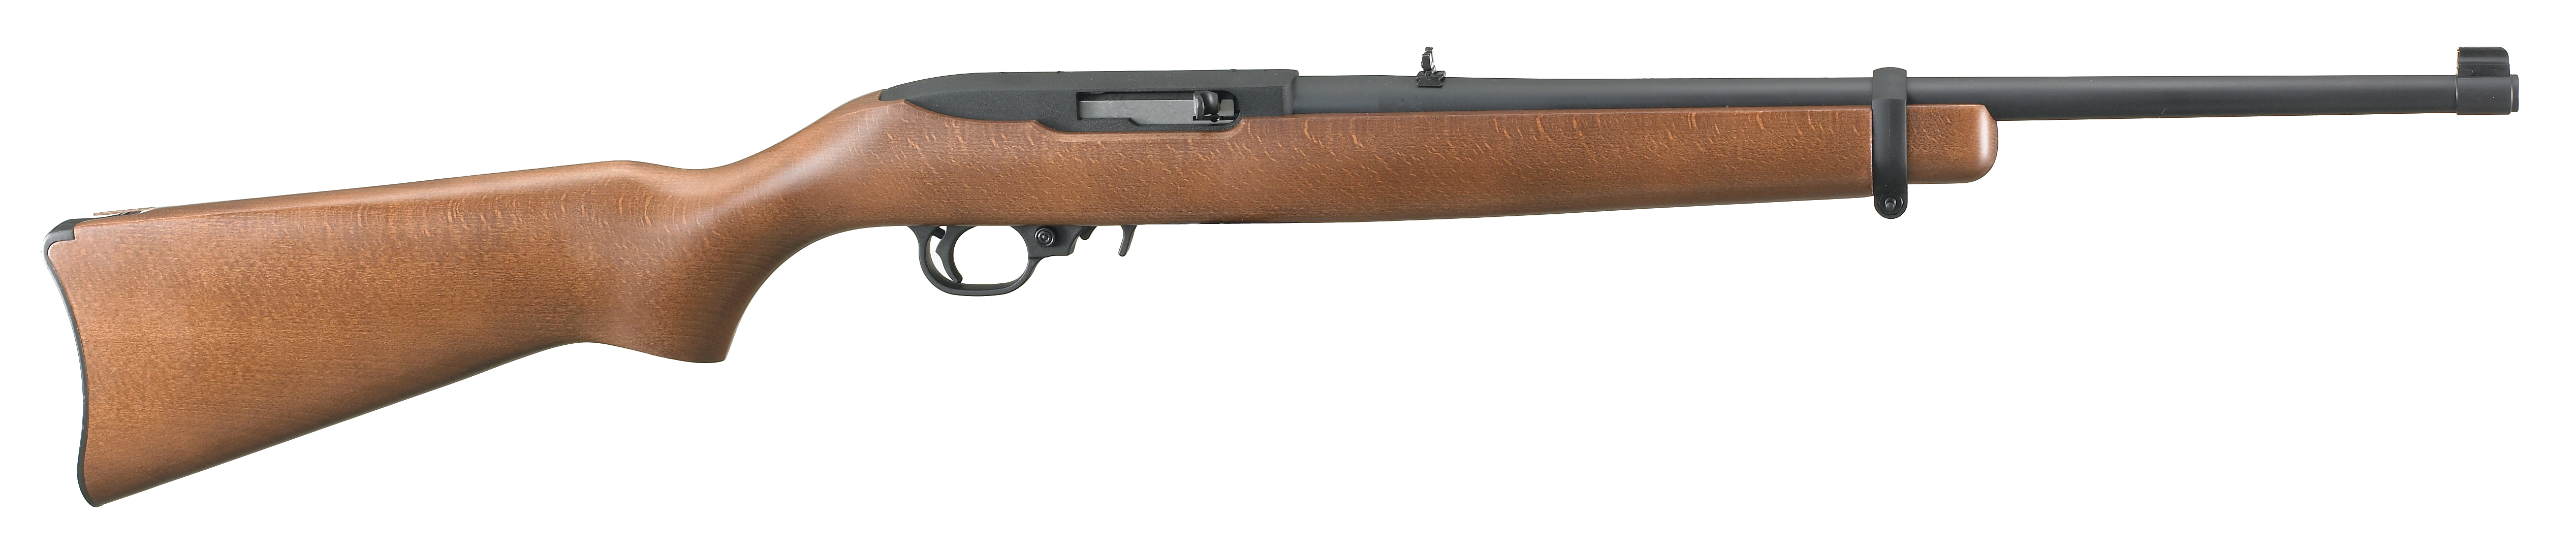 weapons, ruger 10/22 rifle